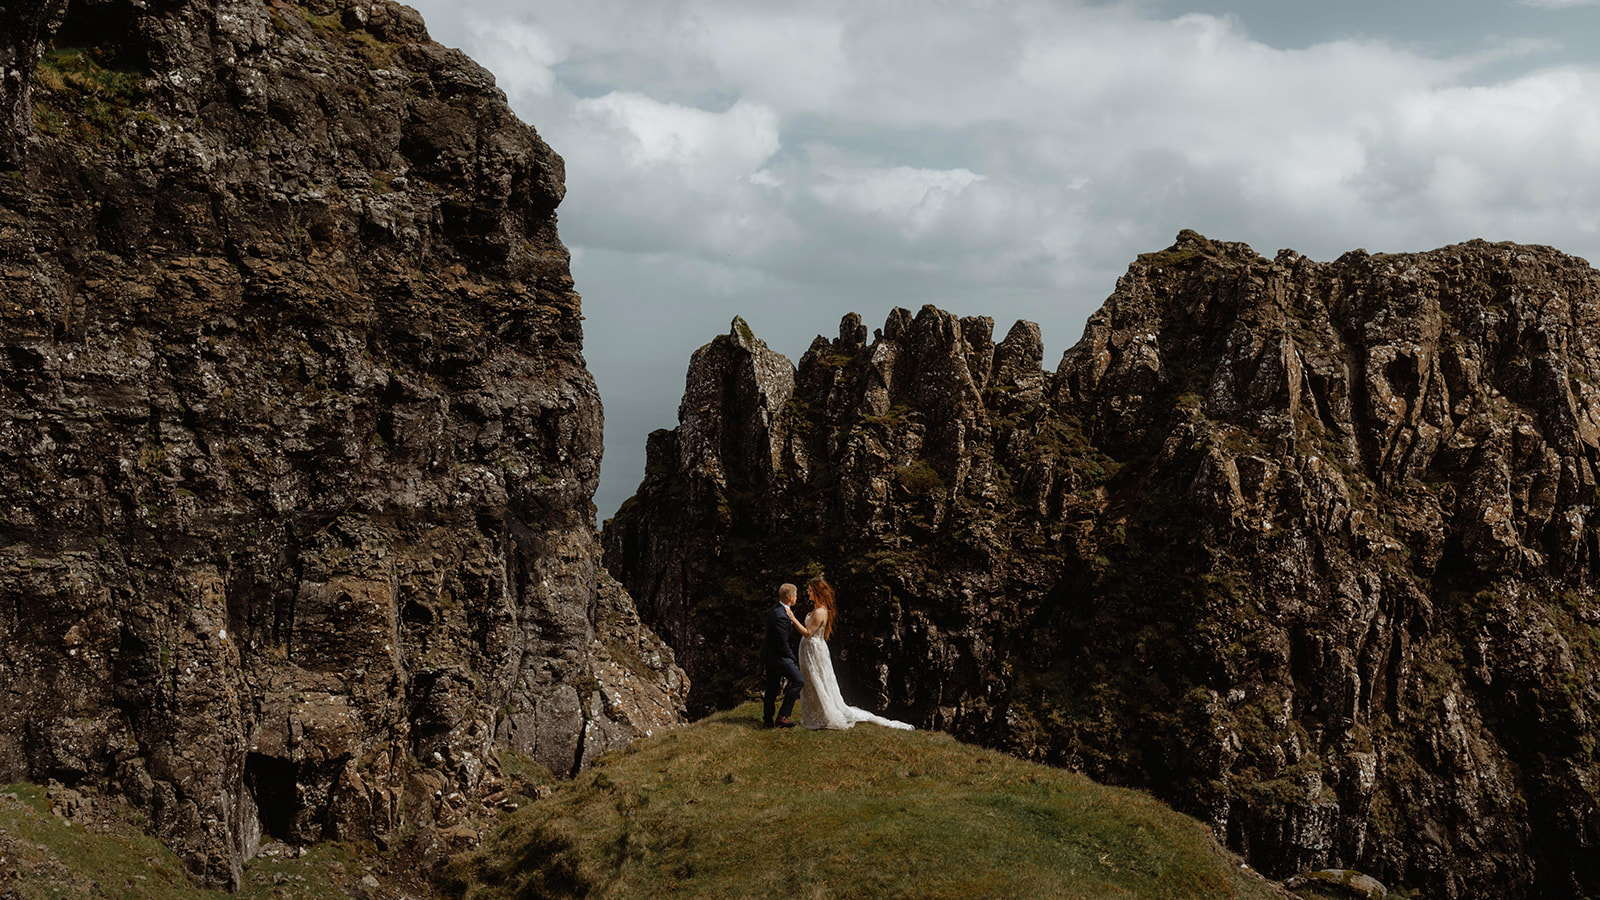 Emma and Matthew shared a beautiful moment during their Isle of Skye Elopement